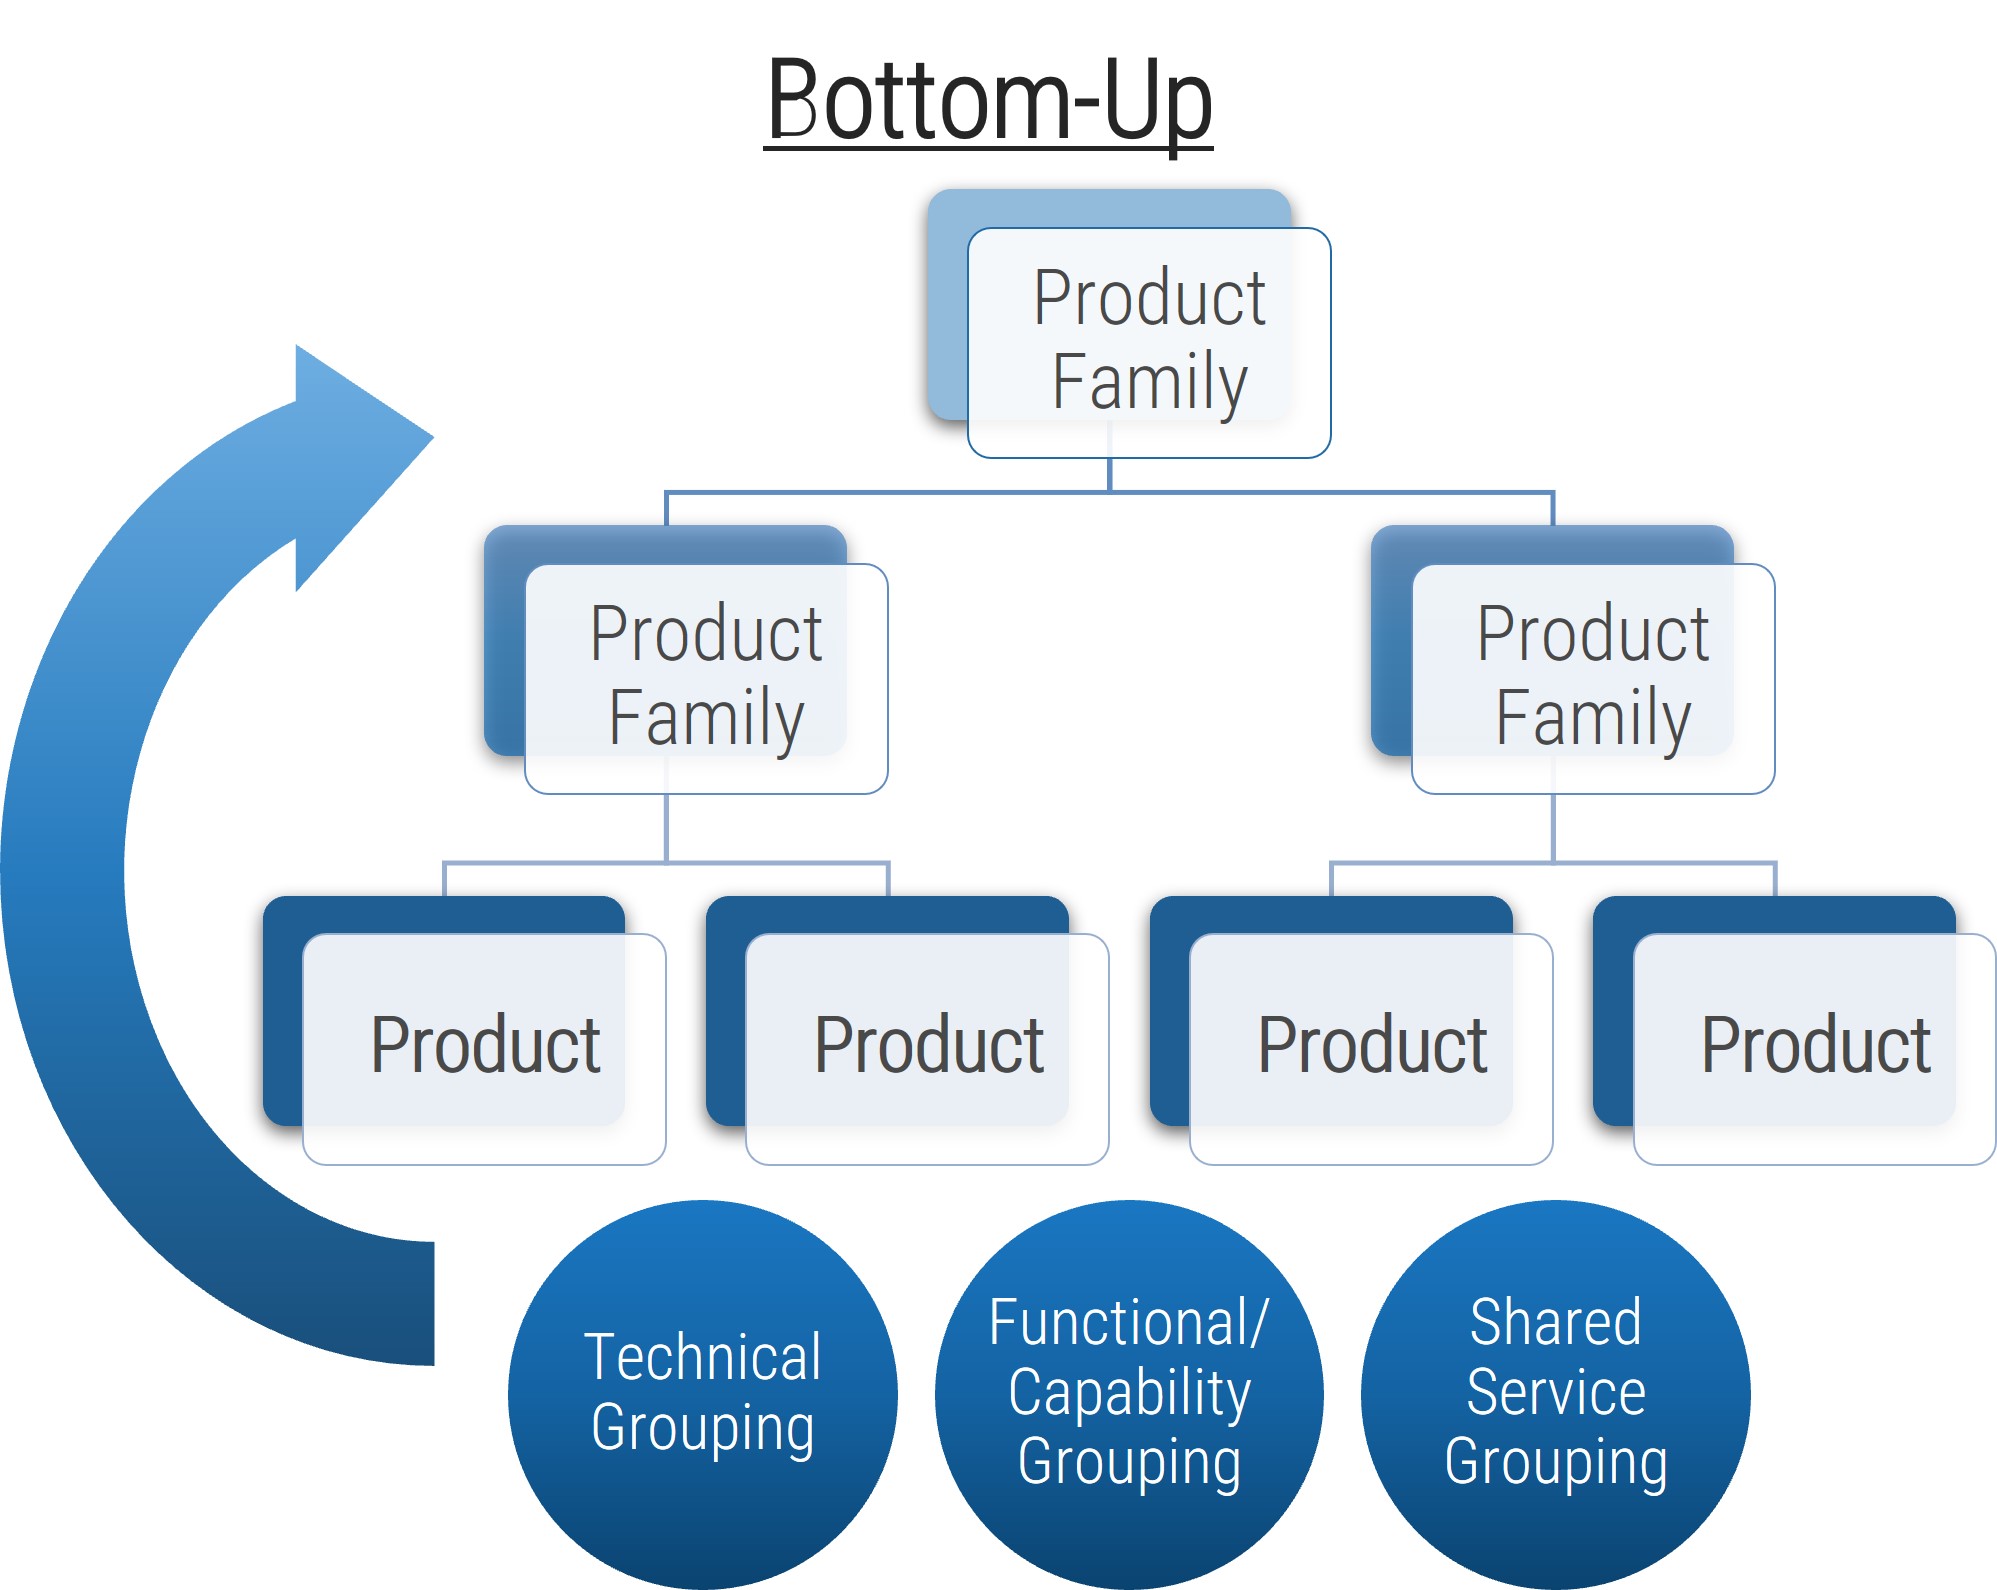 A bottom-up example flowchart is shown.